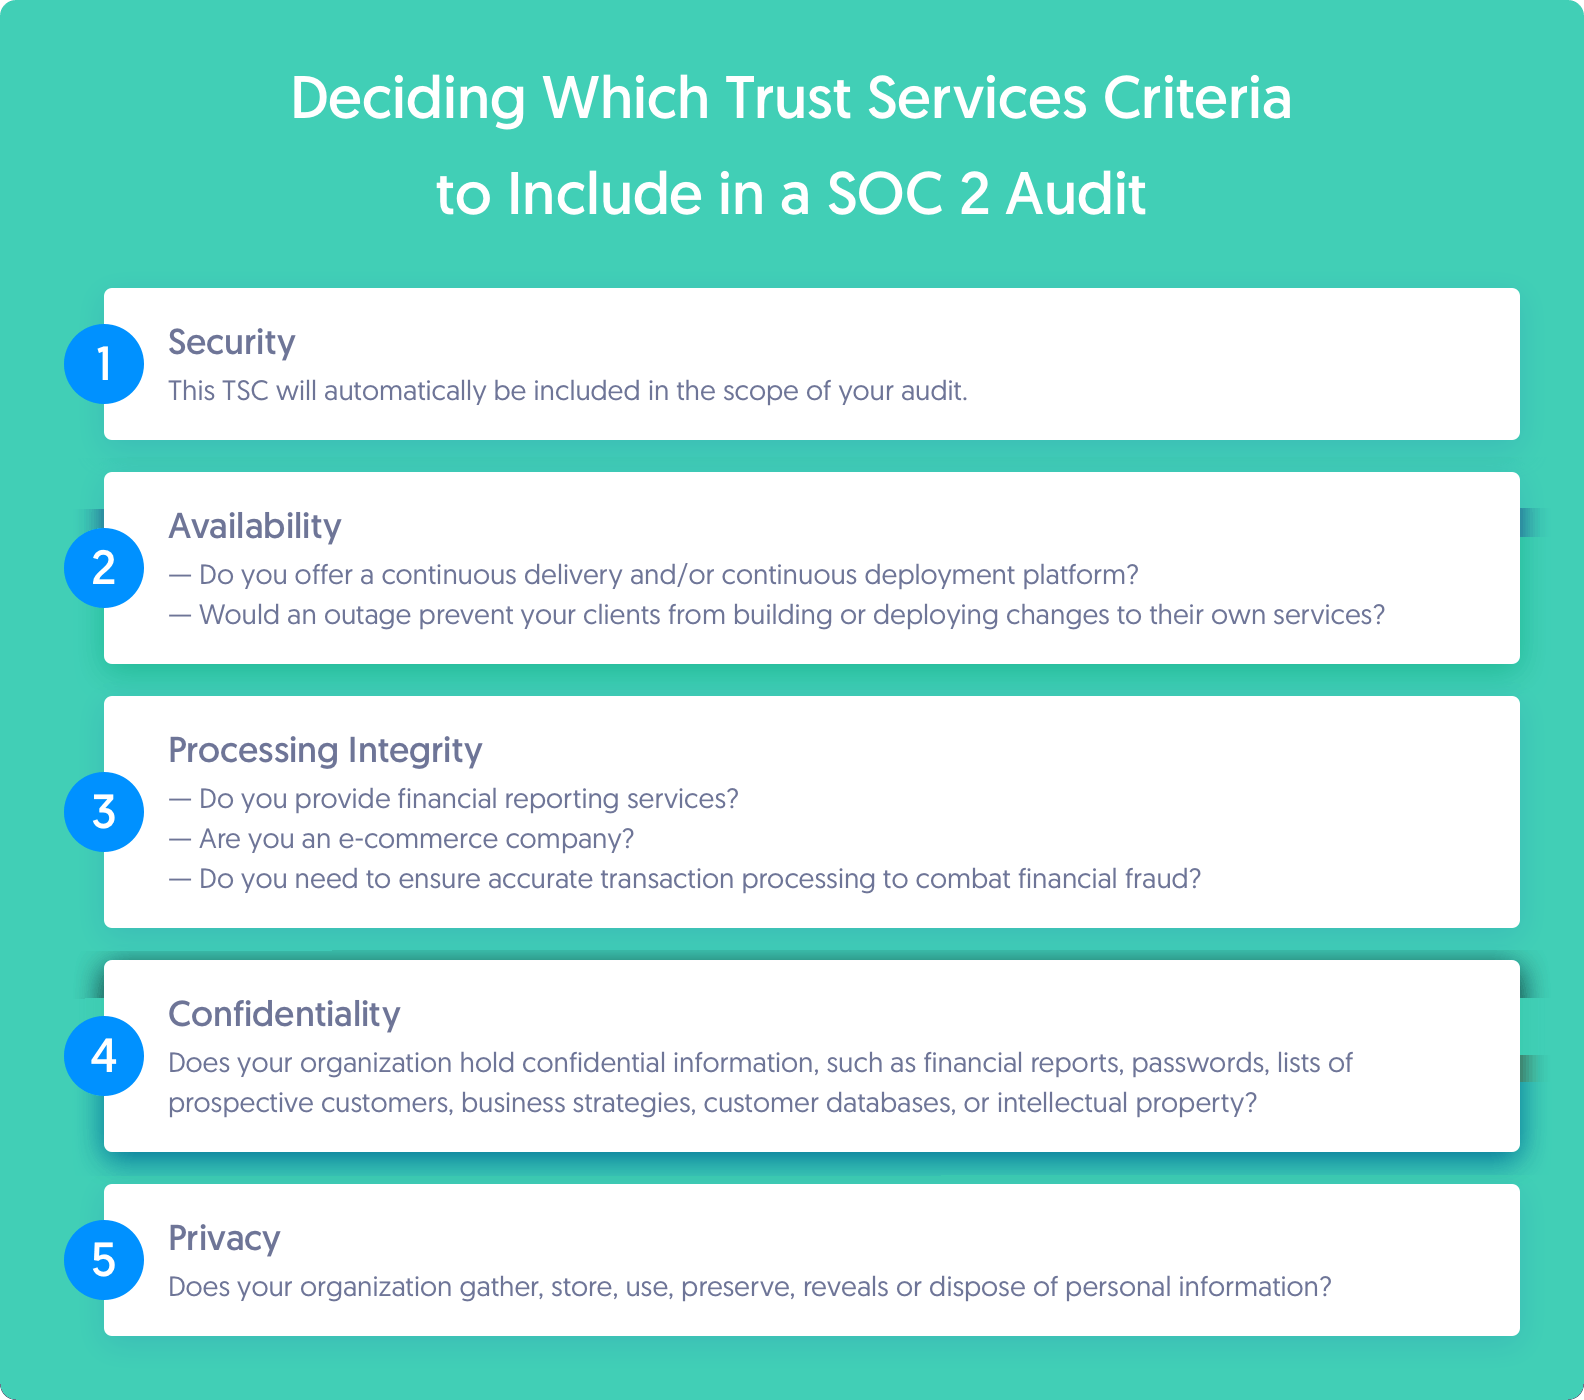 AICPA Trust Services Criteria list and guidance for which trust services principles to include in a SOC2 compliance audit